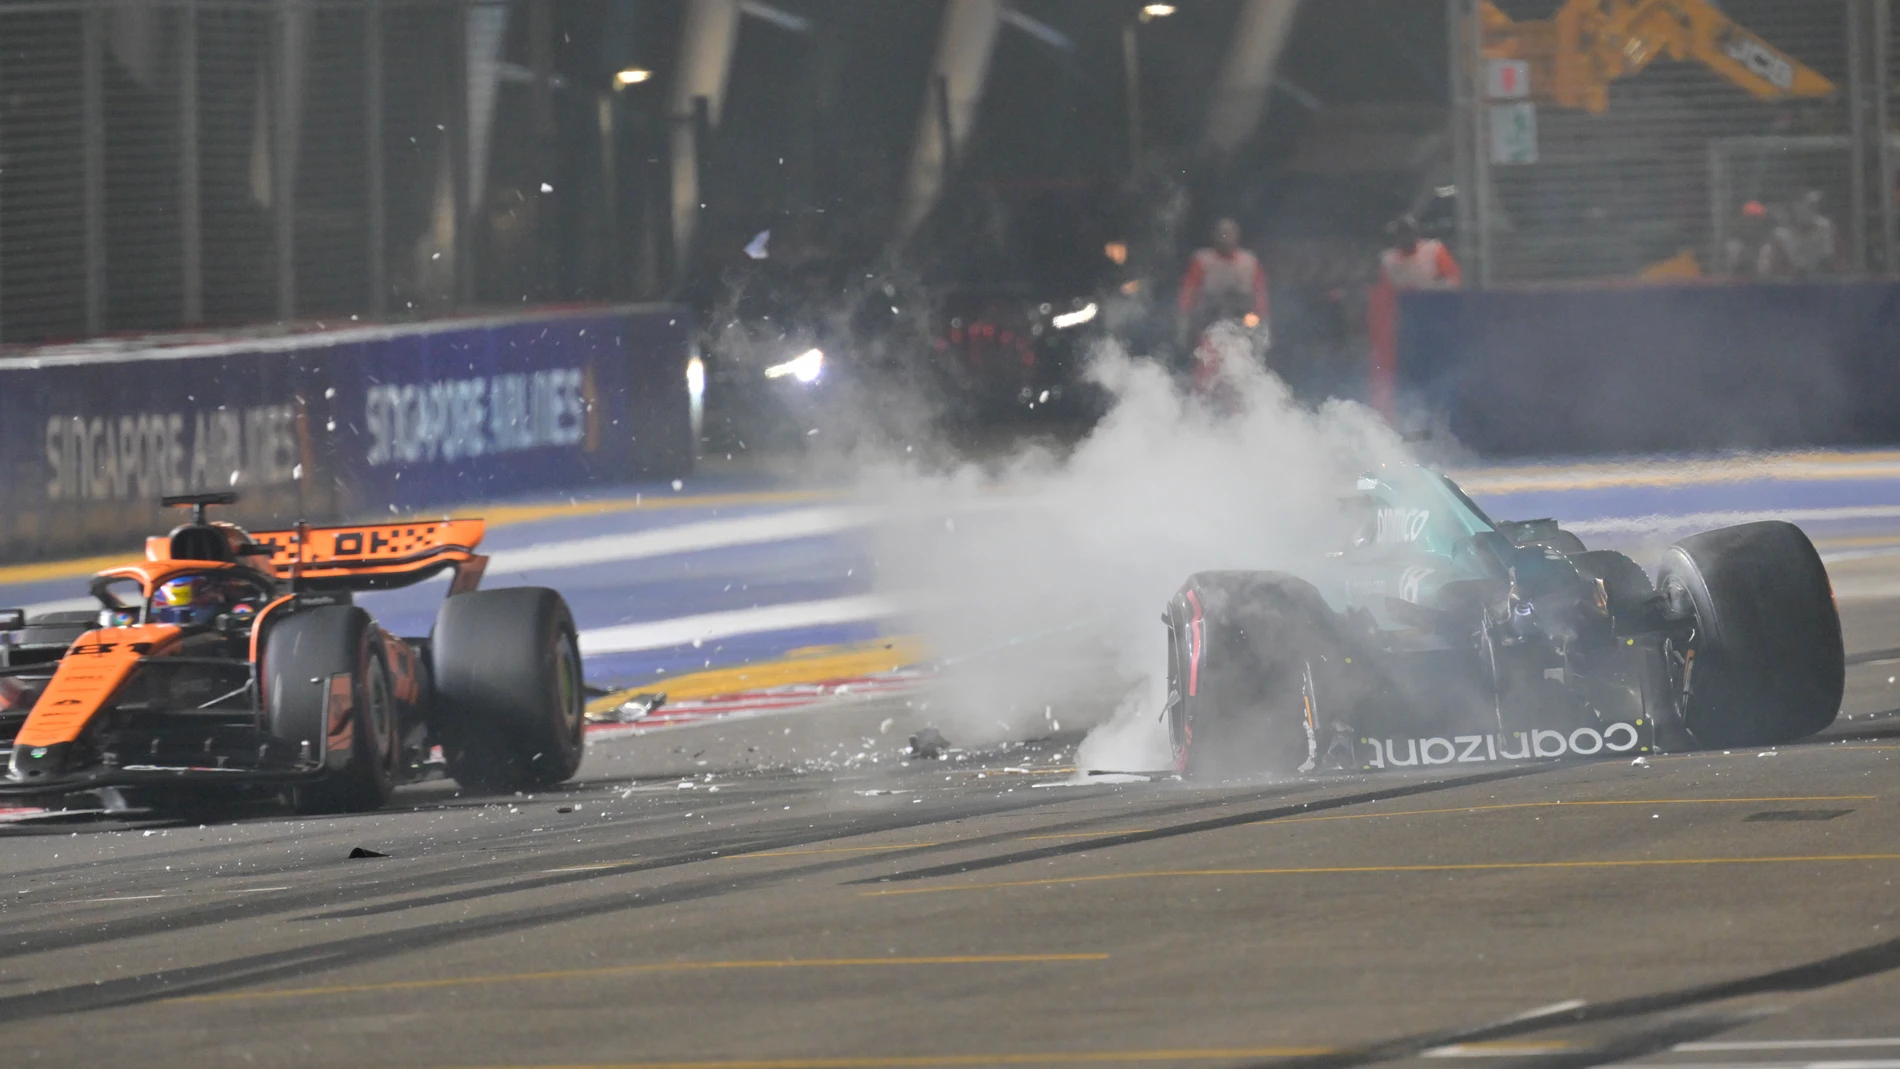 Smoke comes out of the car of Aston Martin driver Lance Stroll of Canada after a crash as Mclaren driver Oscar Piastri of Australia passes by during the qualifying session of the Singapore Formula One Grand Prix at the Marina Bay circuit, Singapore, Saturday, Sept. 16, 2023. (Caroline Chia/Pool Photo via AP)